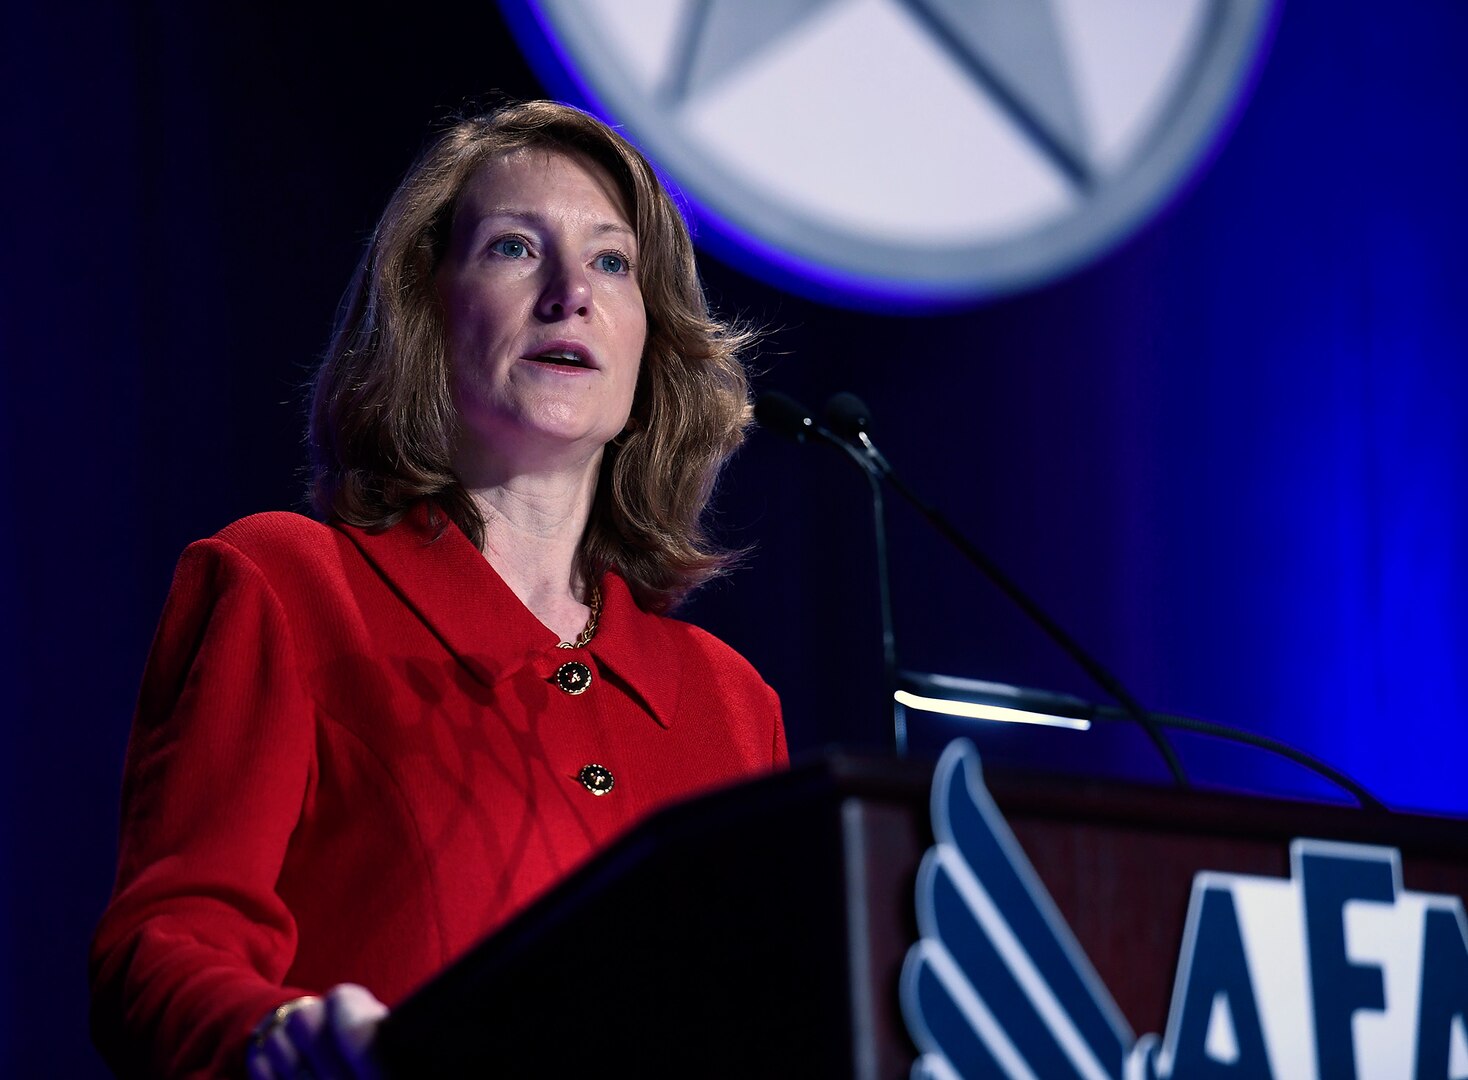 Acting Secretary of the Air Force Lisa S. Disbrow gives her "State of the Air Force" keynote at the Air Force Association Air Warfare Symposium March 3, 2017, in Orlando, Fla. She spoke about the need to invest in Airmen, technology, space and acquisition, and enlist the help of industry to reach this goal. (U.S. Air Force photo/Scott M. Ash)